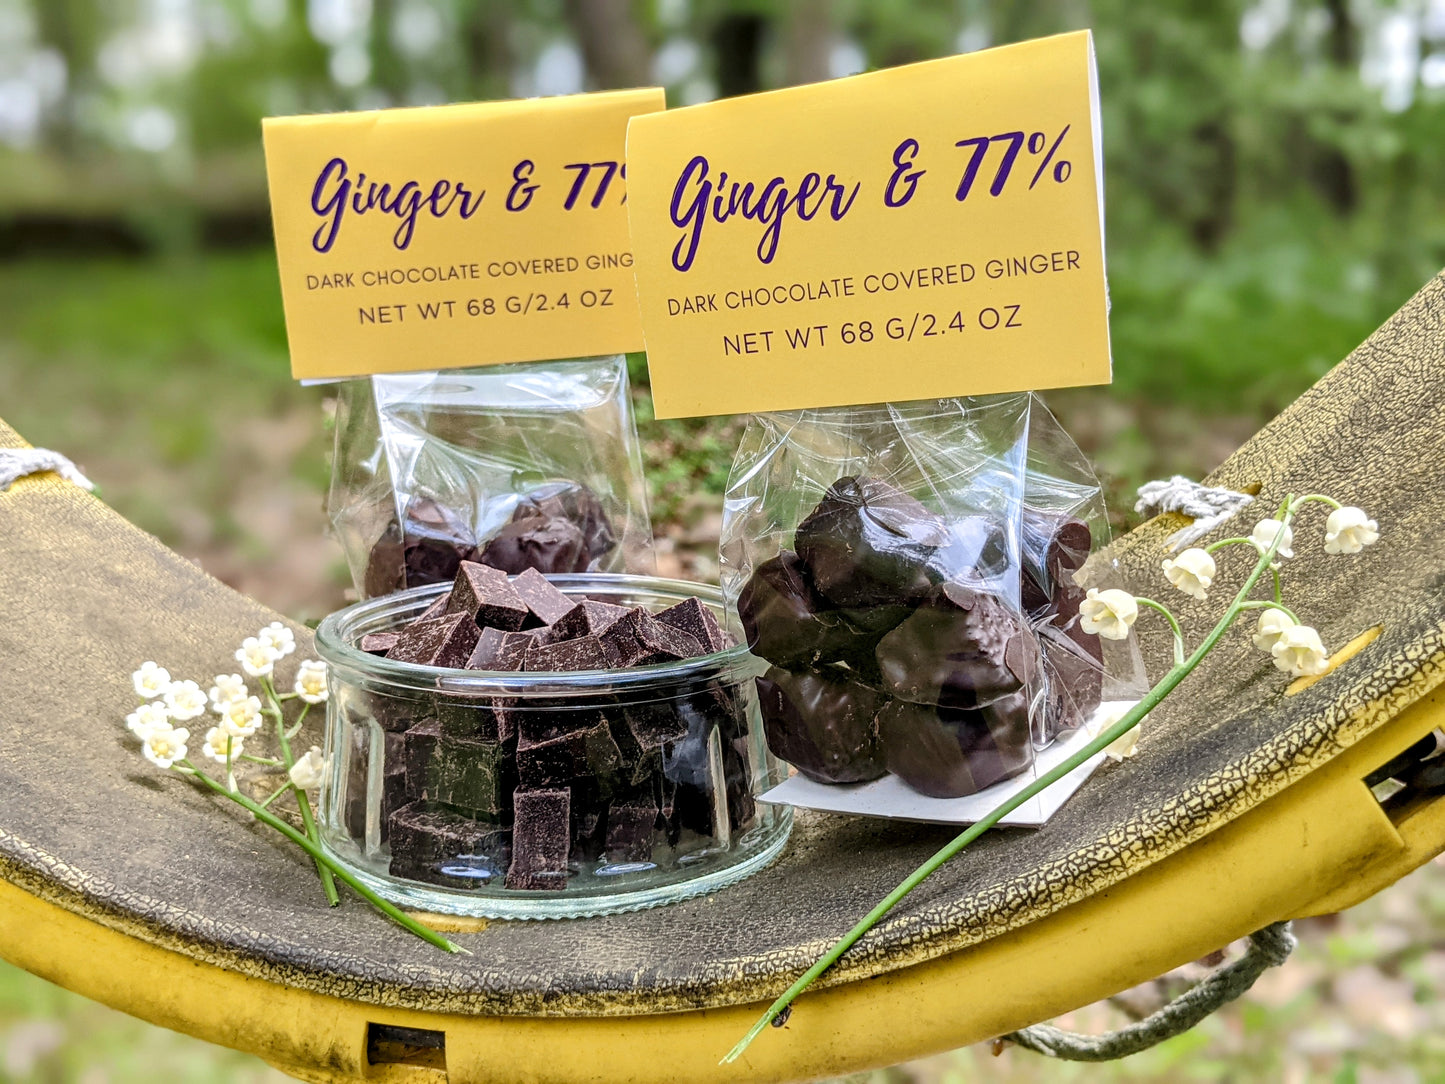 Chocolate Dipped Ginger | 77% Cacao